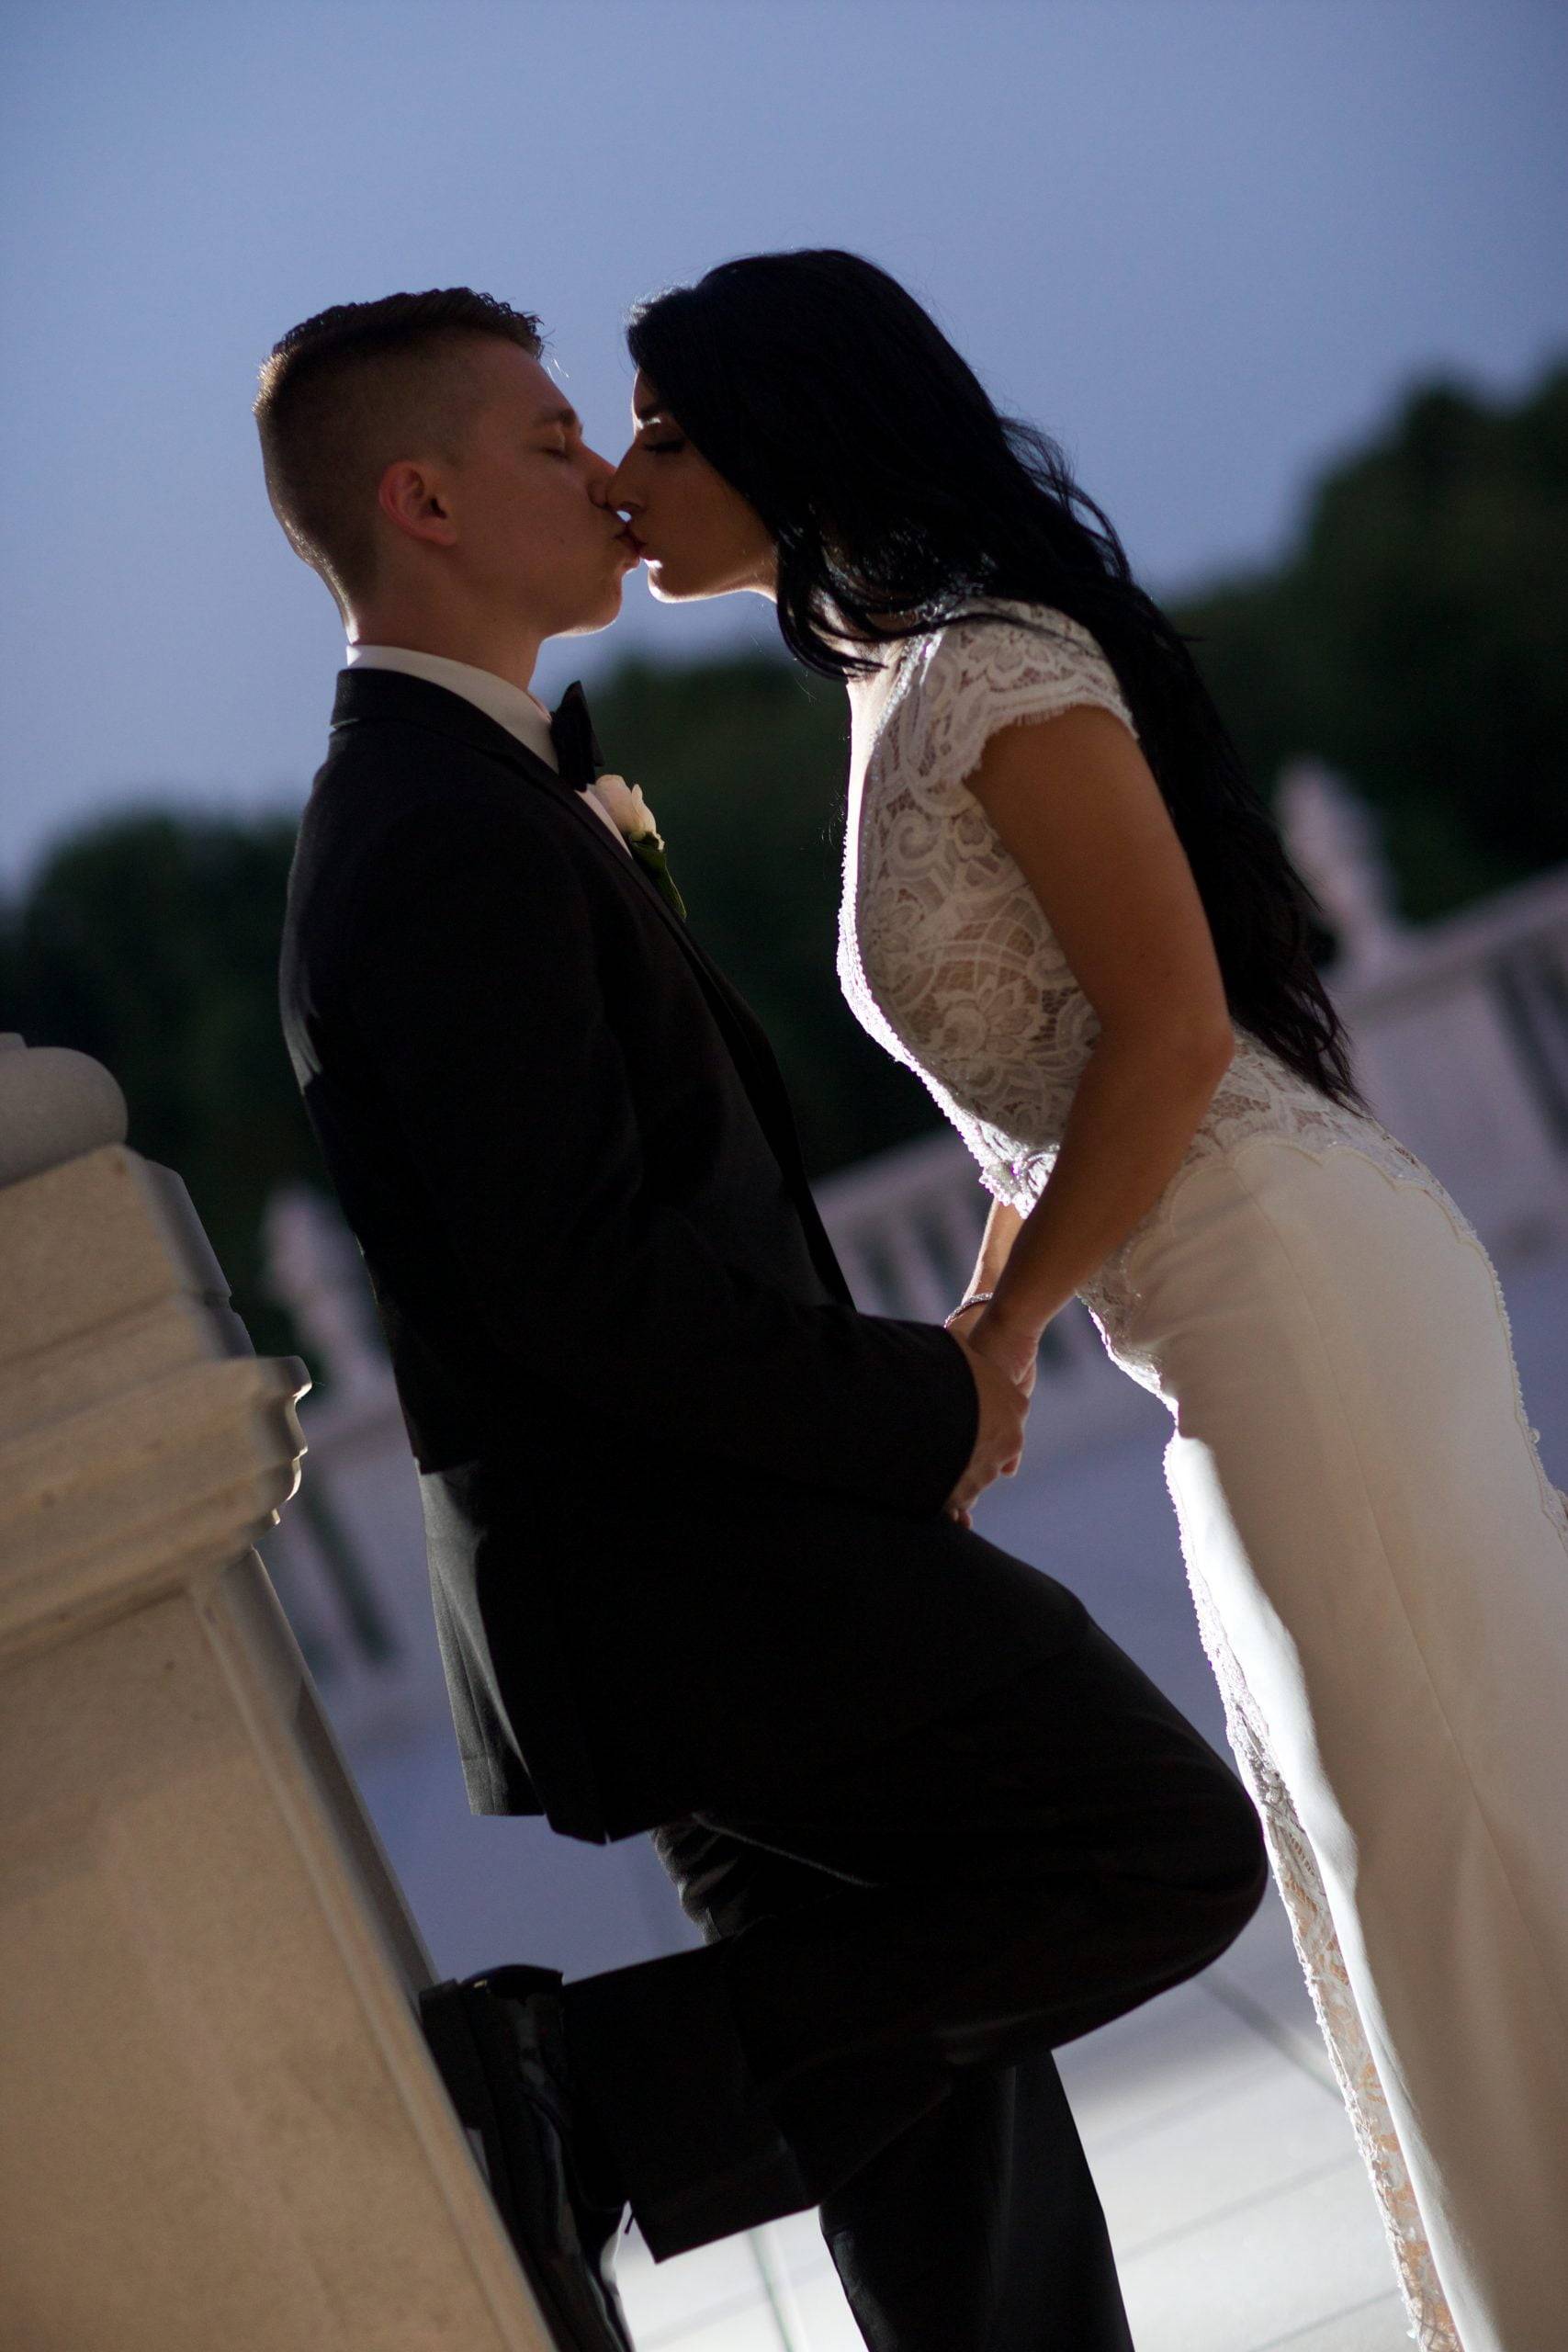 A bride and groom kissing on the steps of a building.